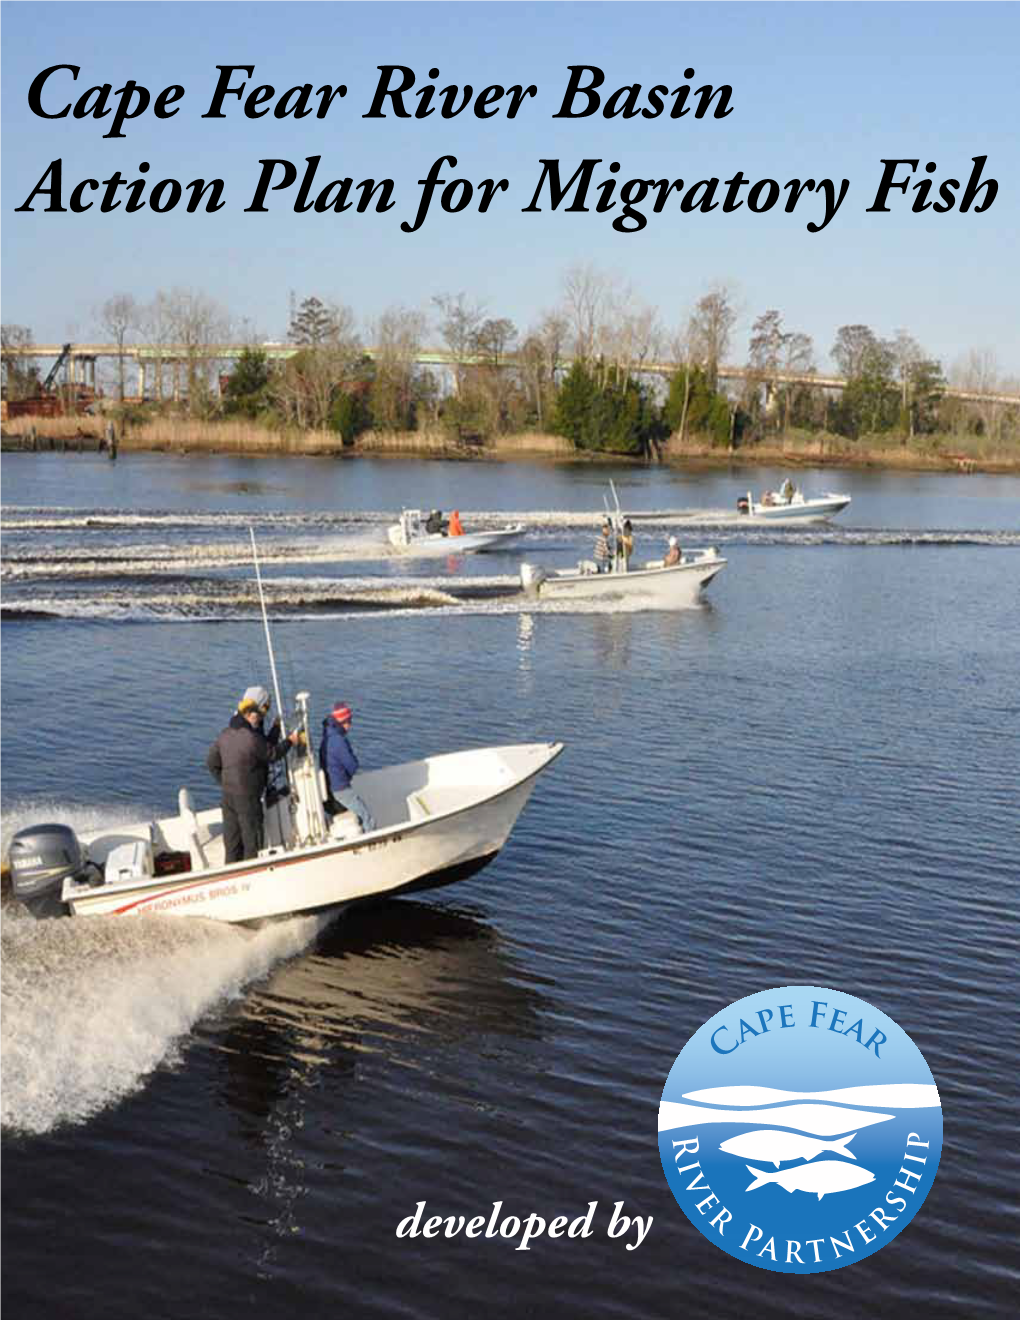 Cape Fear River Basin Action Plan for Migratory Fish